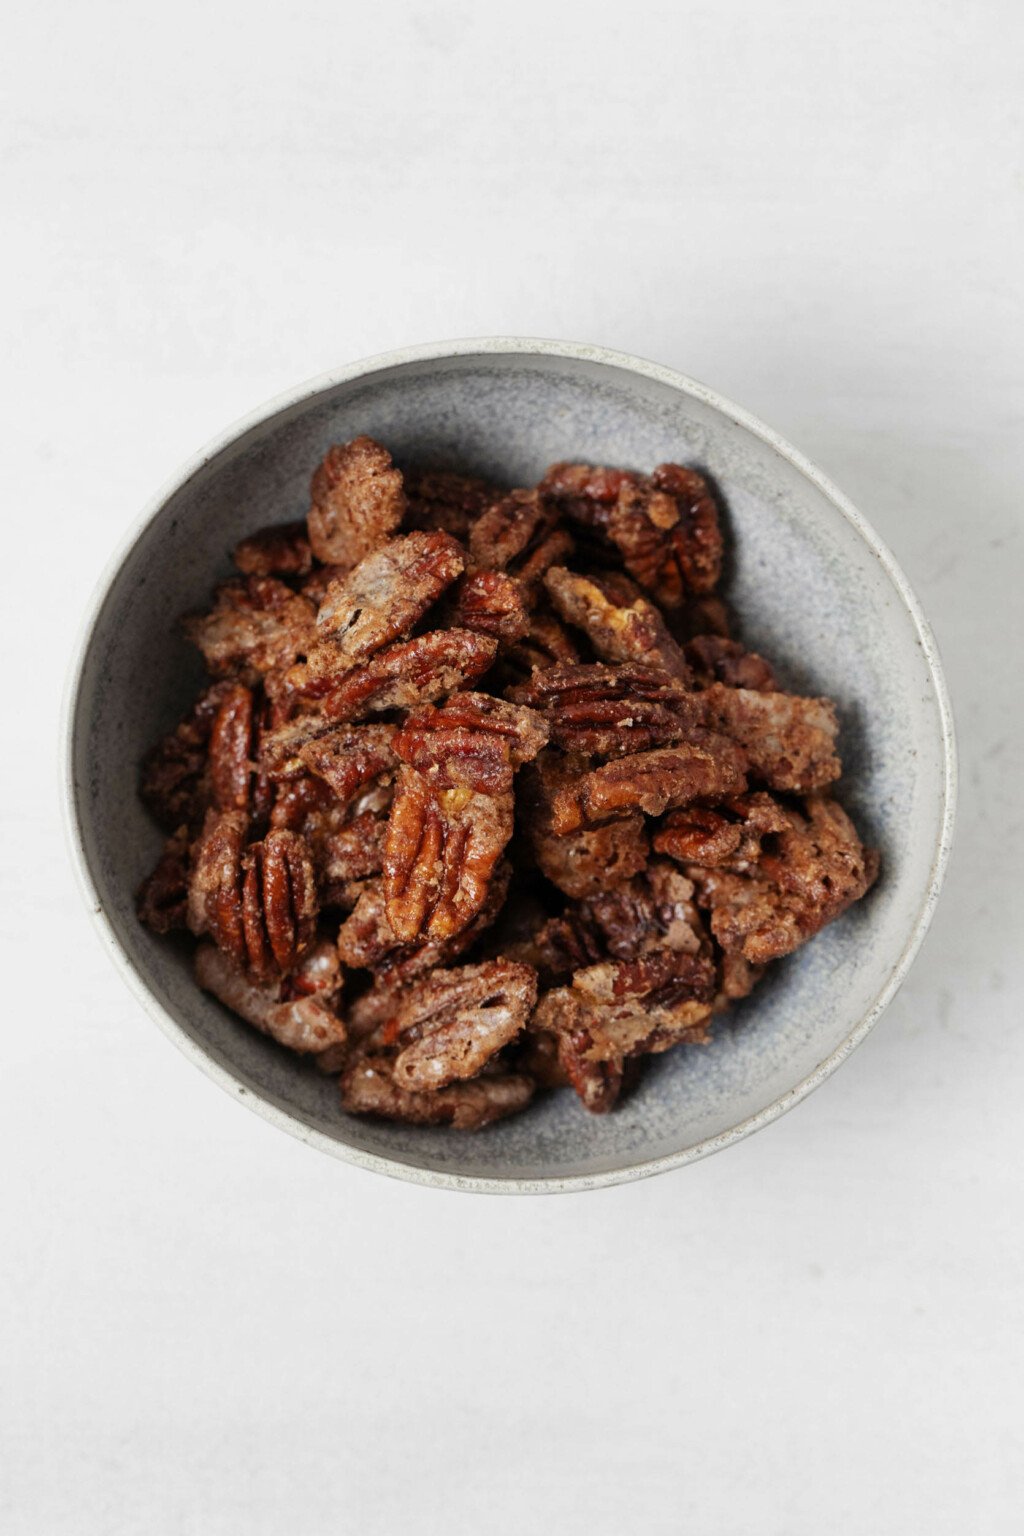 Crispy, vegan candied pecan halves are resting in a gray, ceramic bowl. It's resting on a white suface.